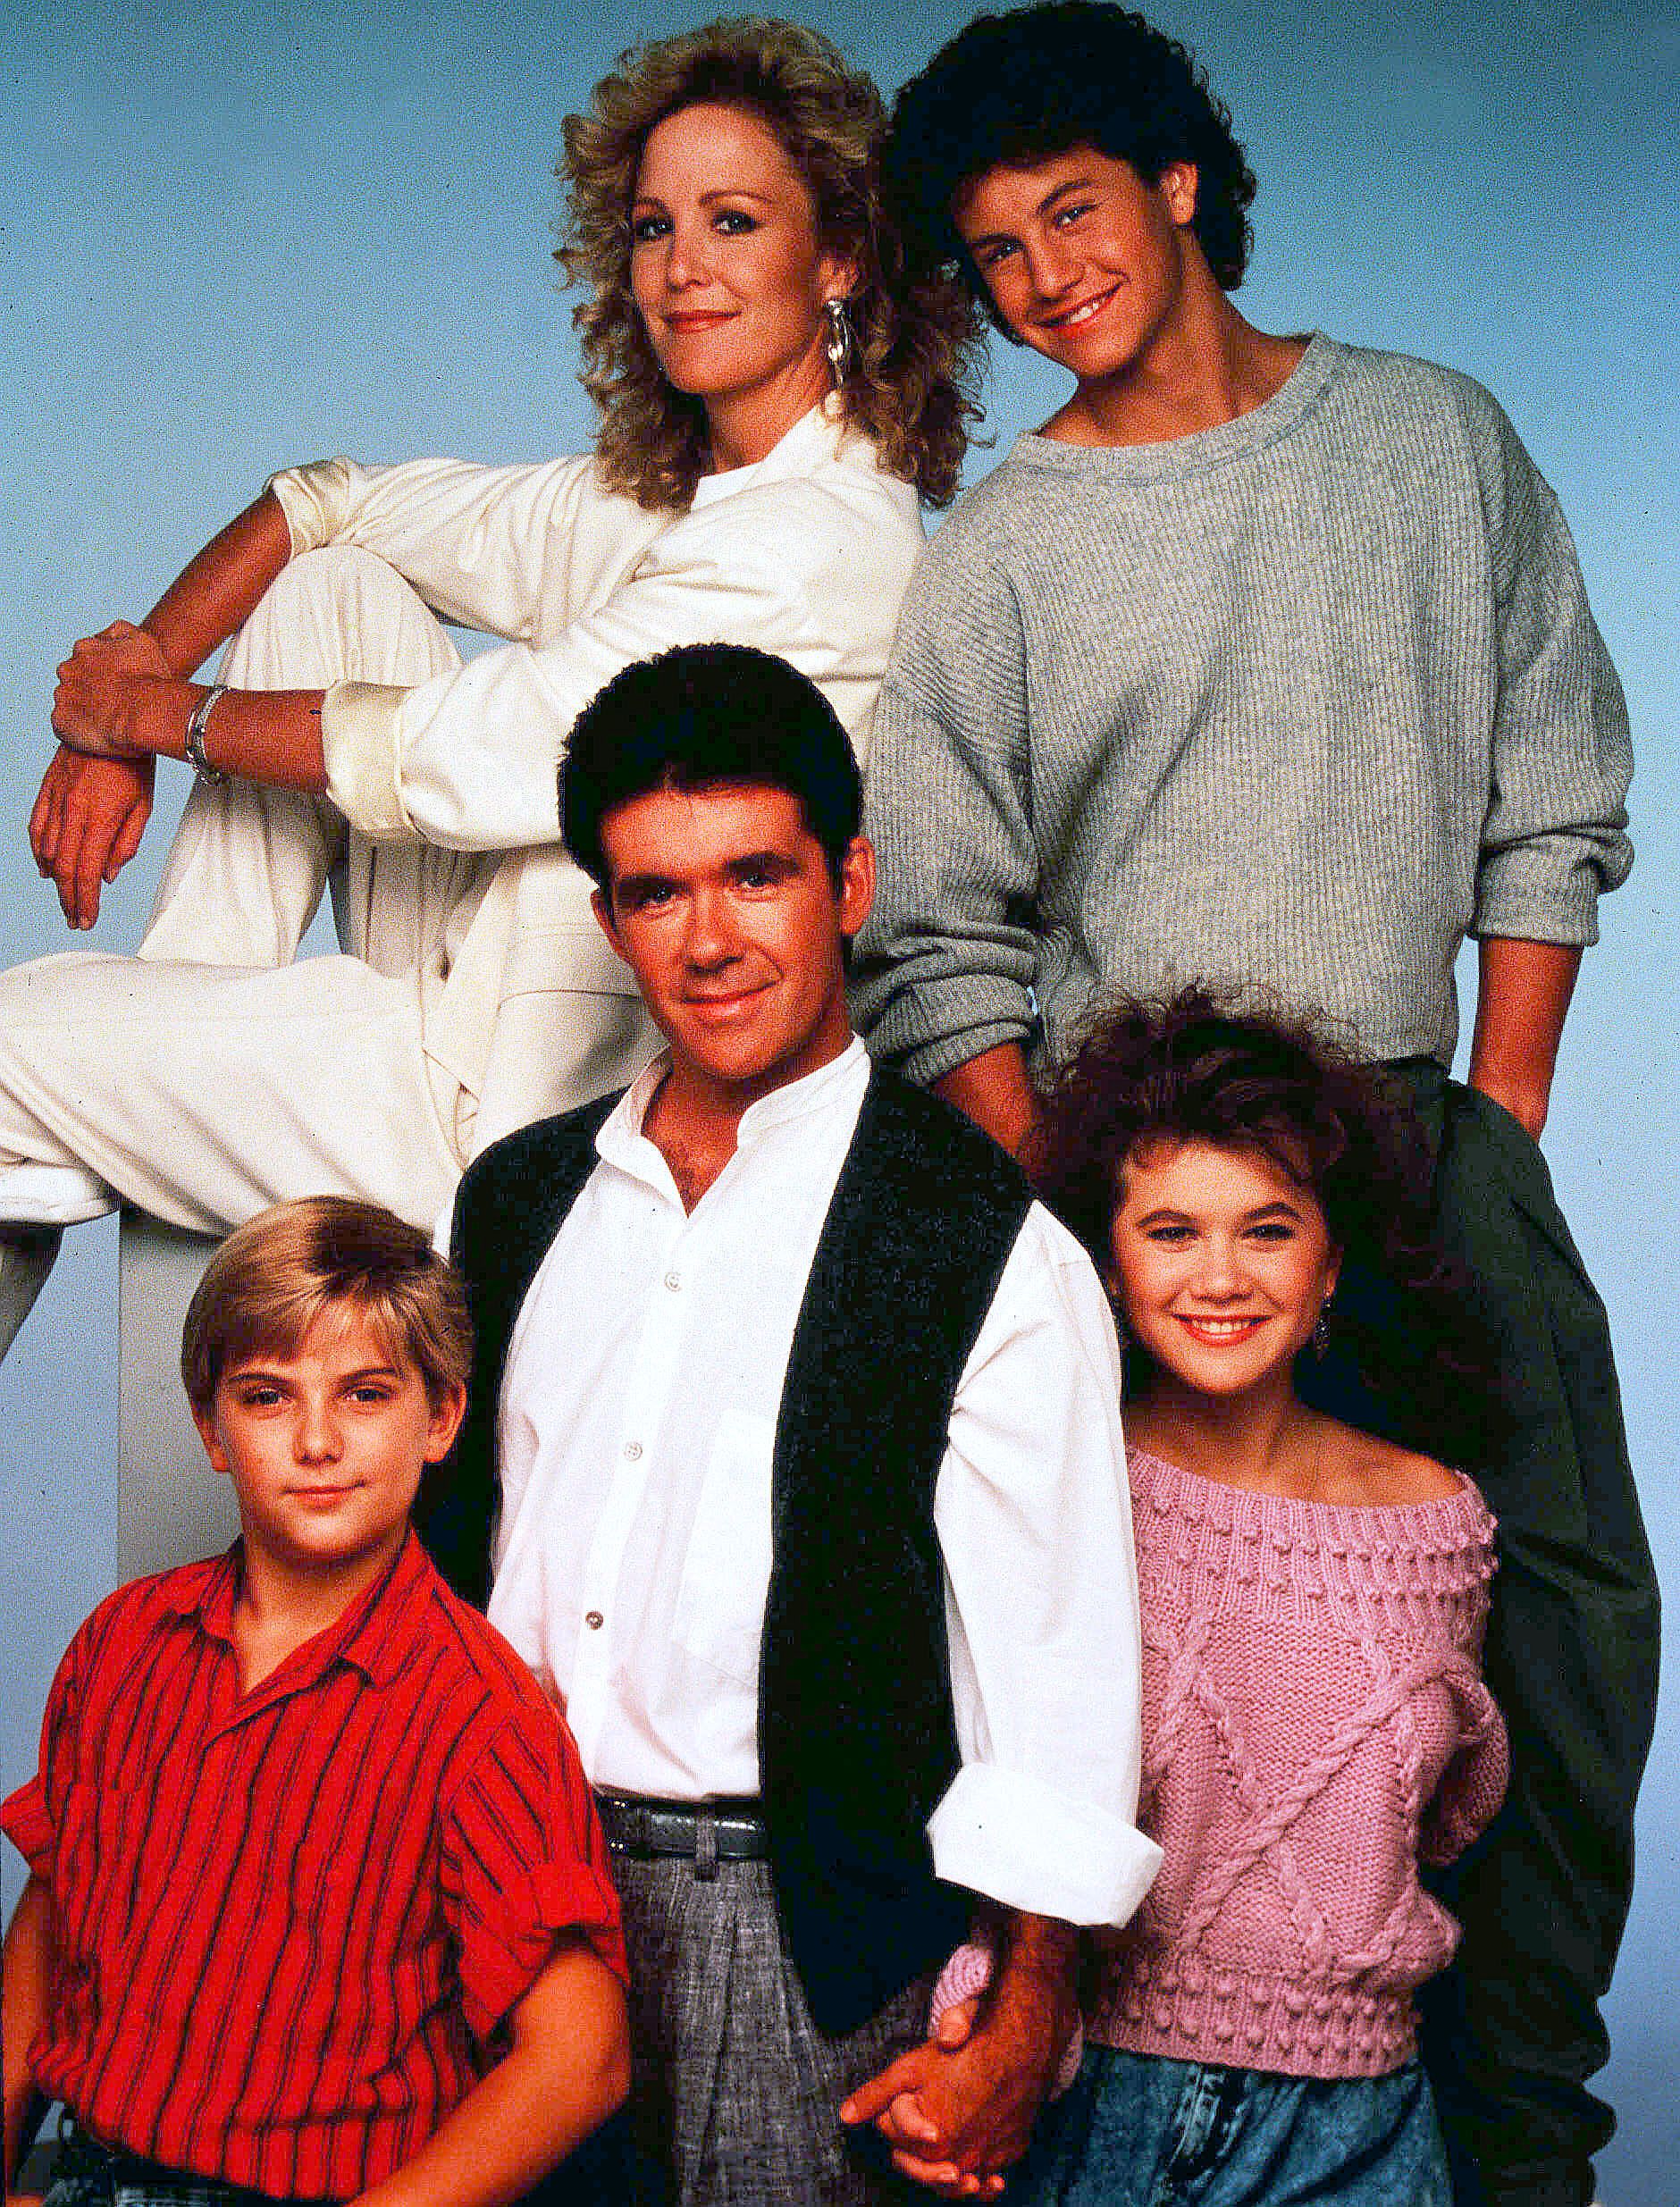 Here's What Happened to the Cast of 'Growing Pains'